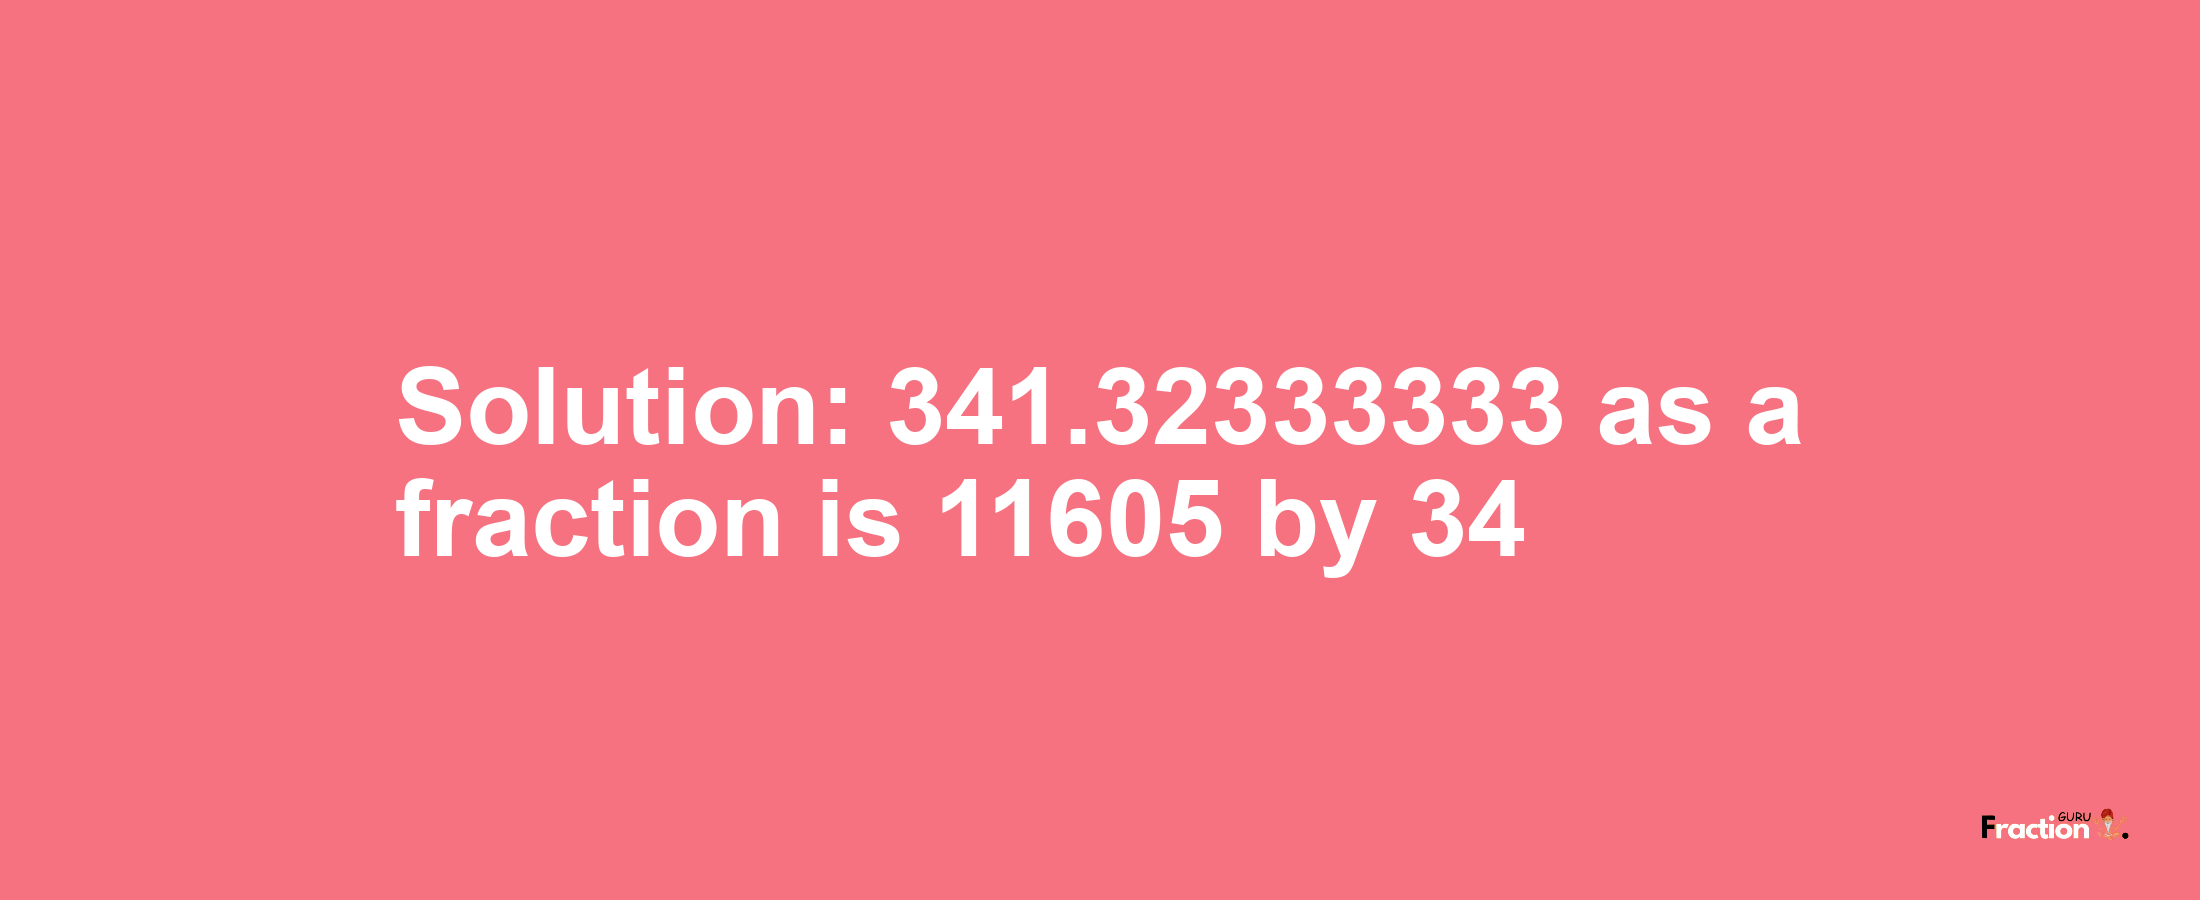 Solution:341.32333333 as a fraction is 11605/34